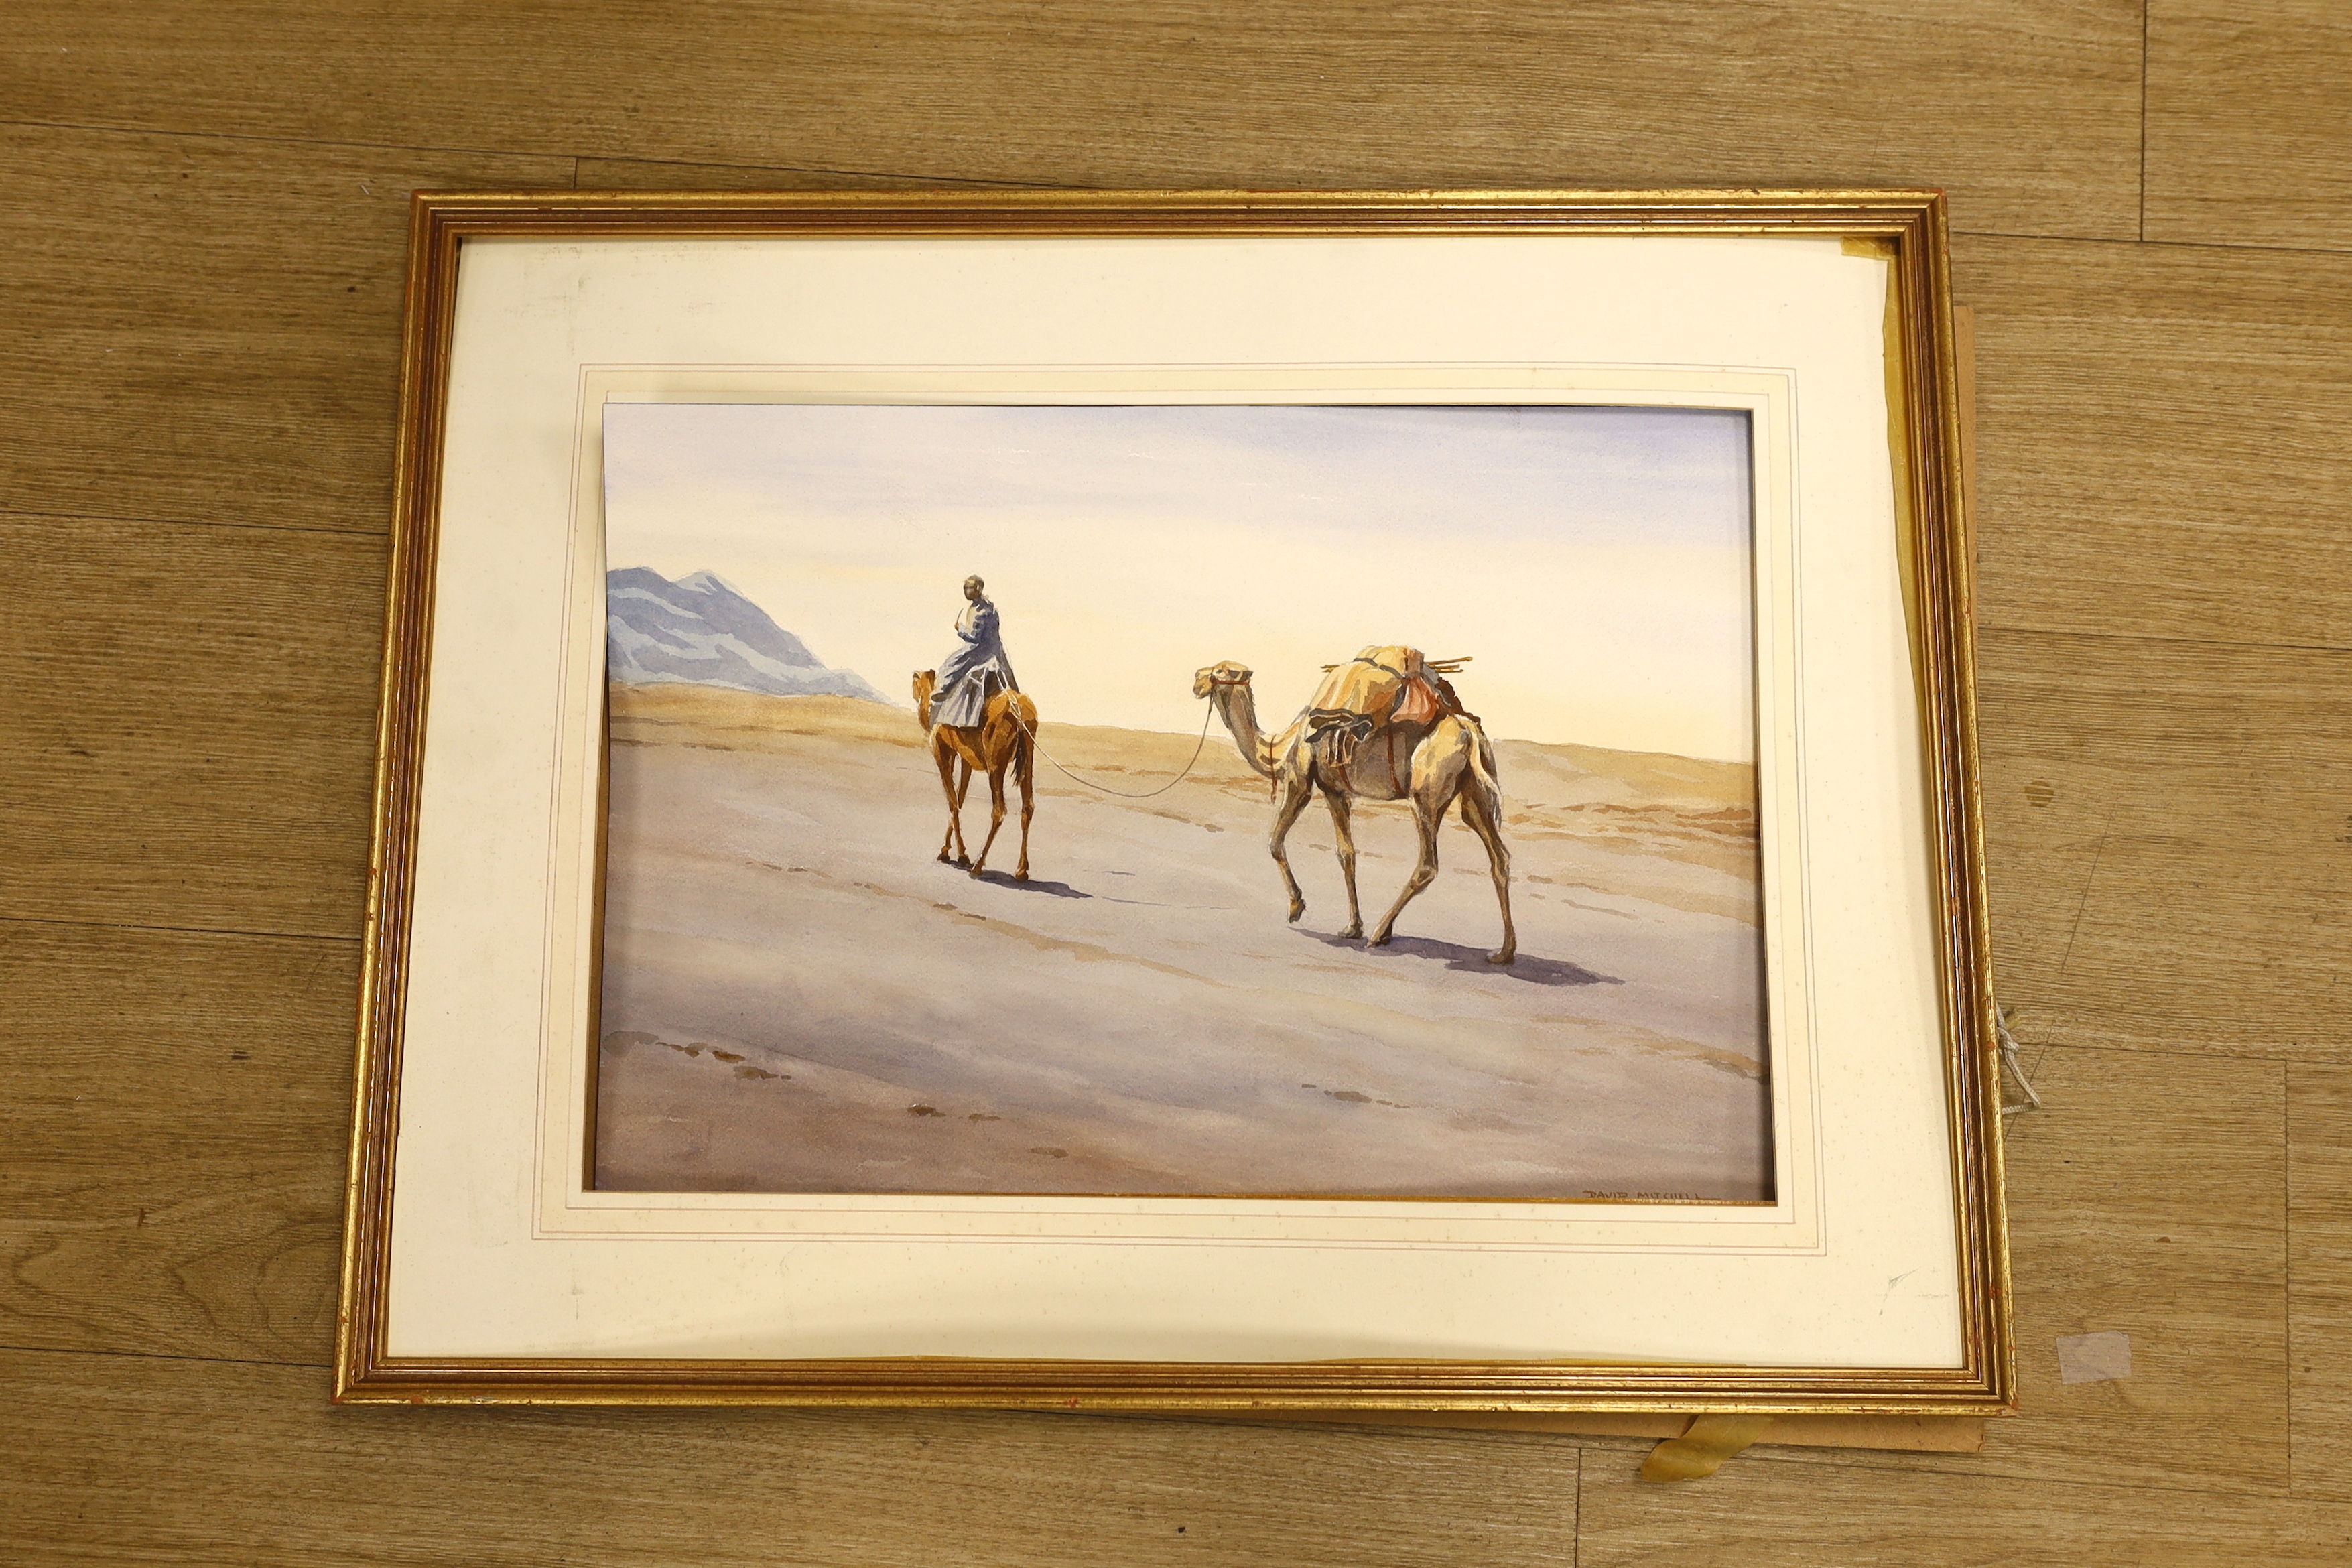 David Mitchell, watercolour, 'The Carpet Trader', signed with label verso, 36 x 51cm